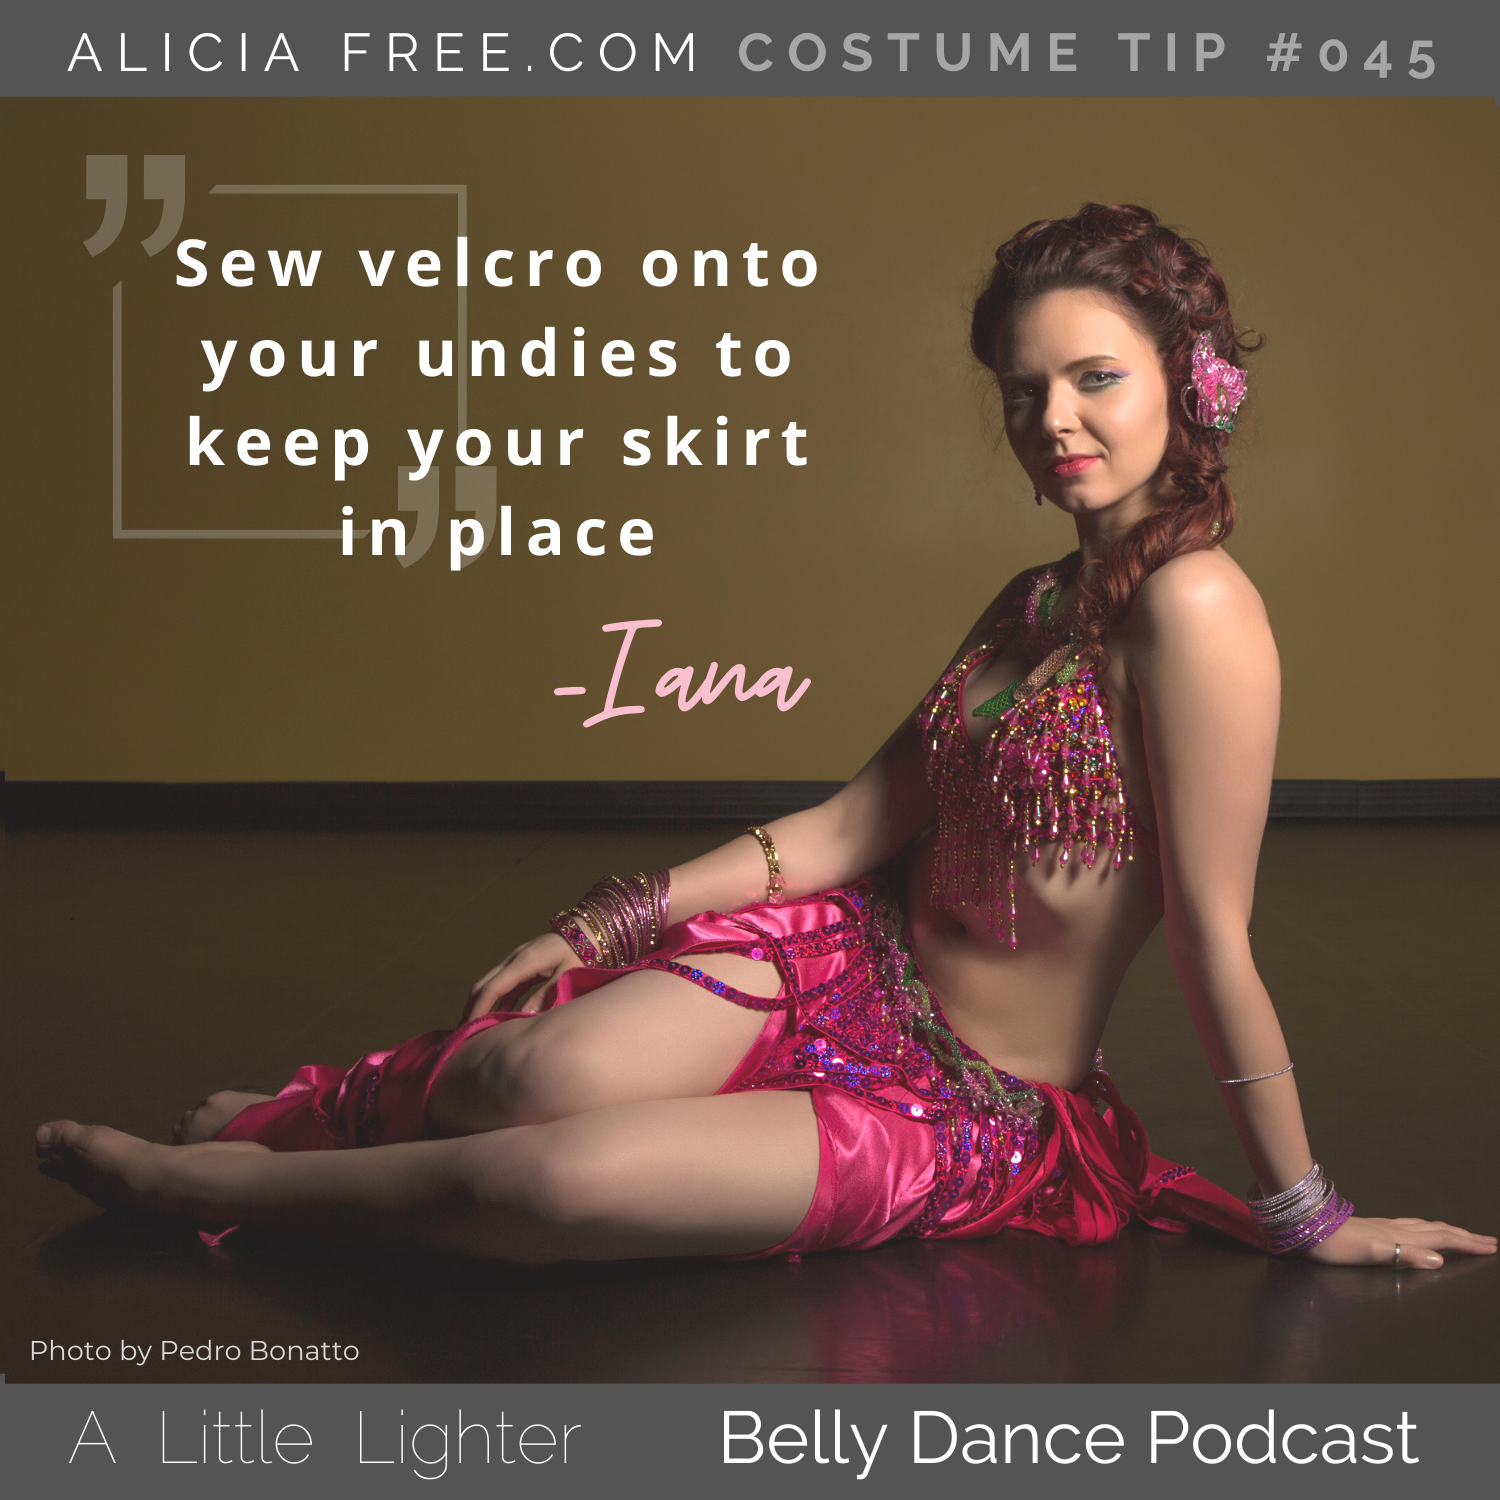 Belly Dance Podcast 045 Costume Tip